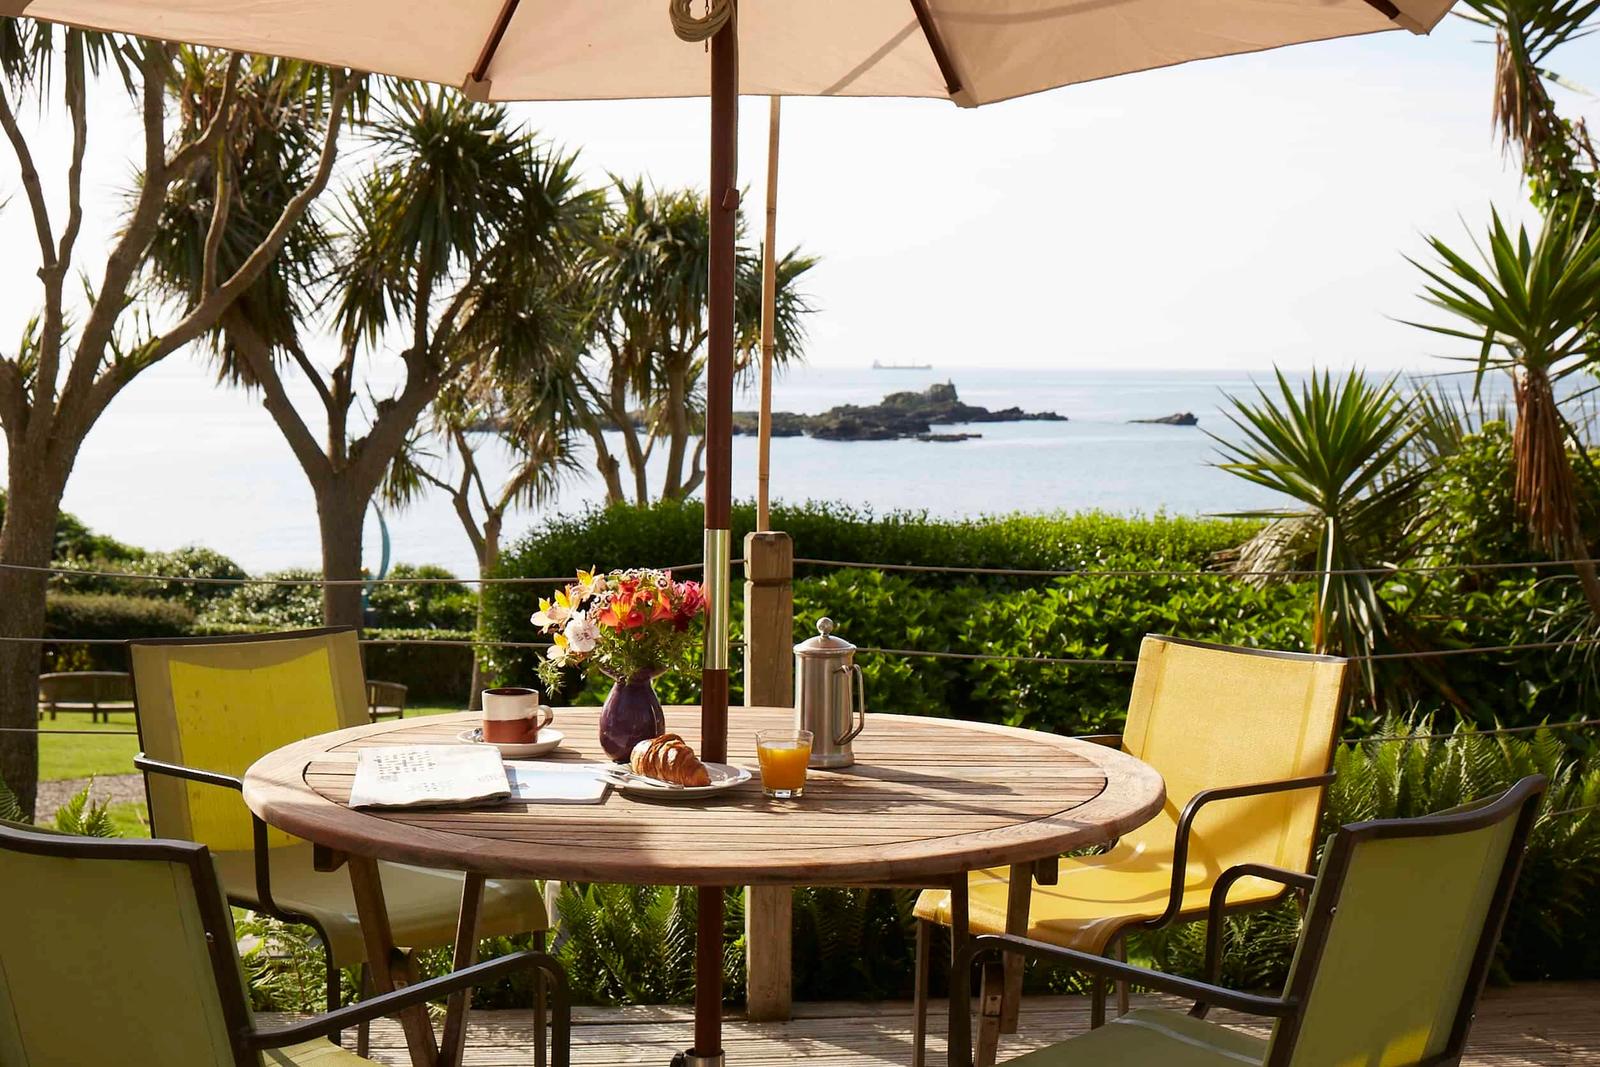 Best gastro pubs with rooms in Cornwall